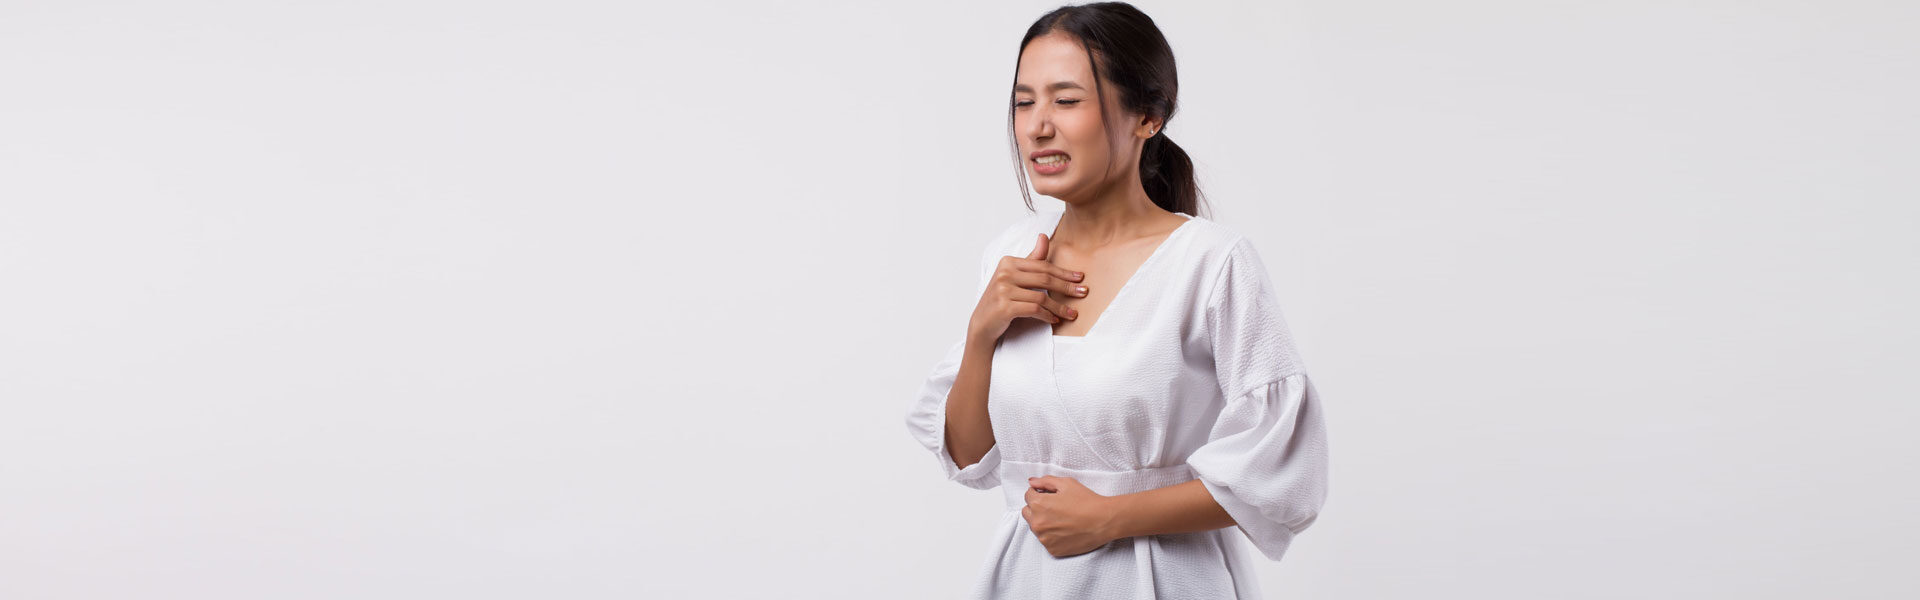 Heartburn and Acid Reflux Treatment in Germantown, MD